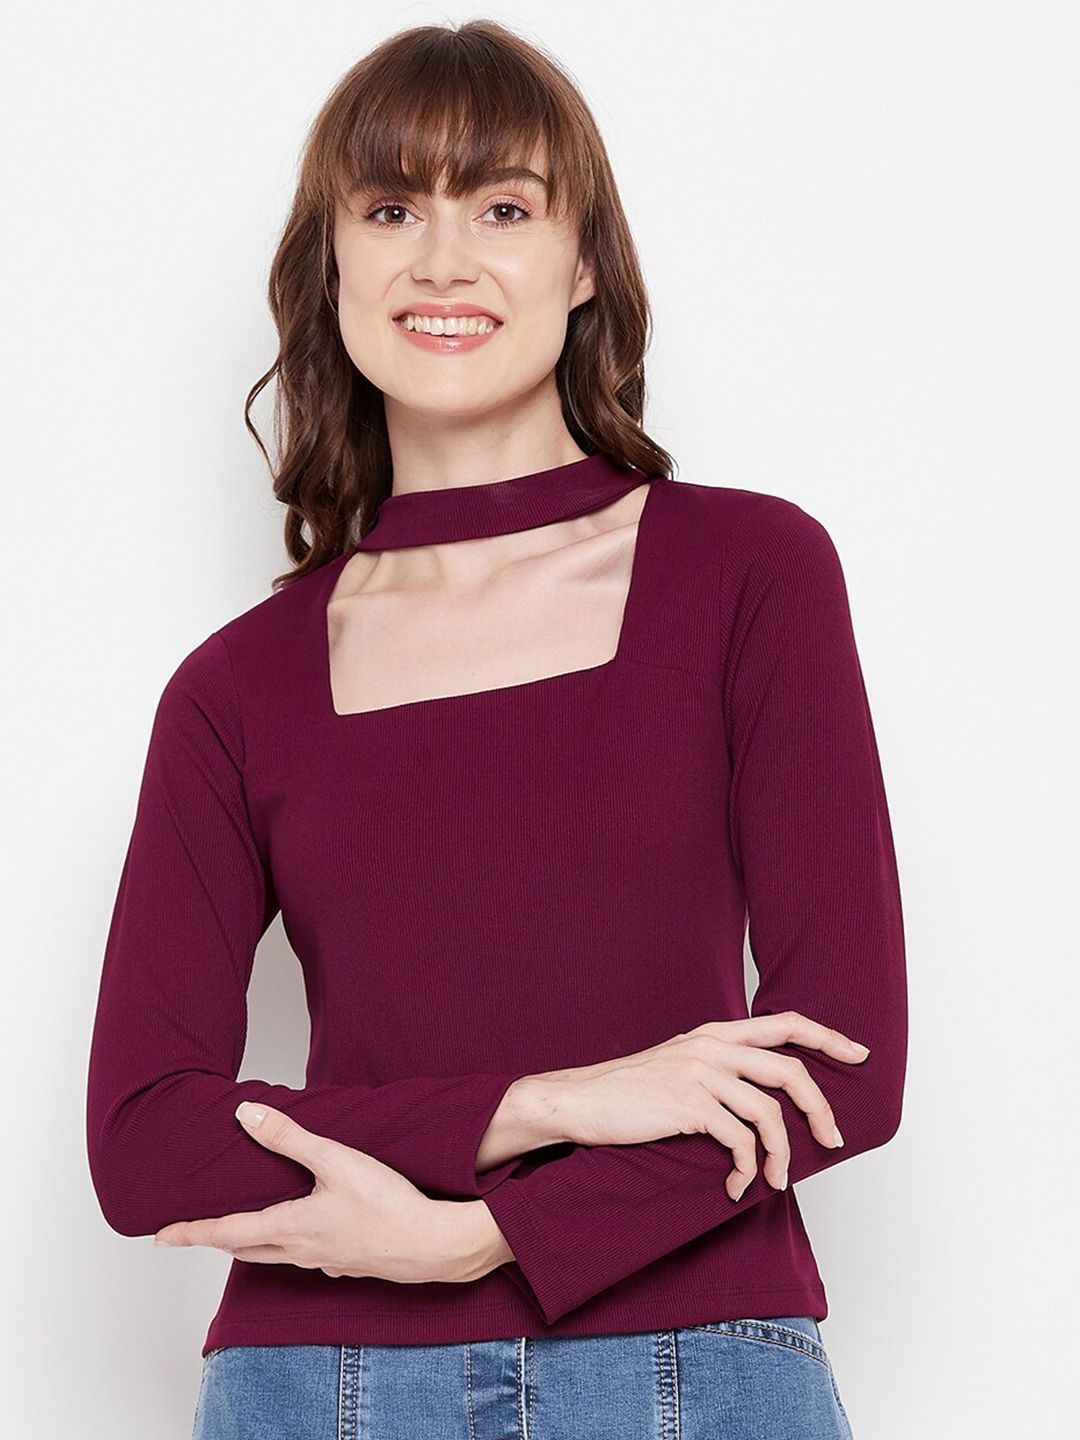 Madame Woman Square Neck Top Price in India